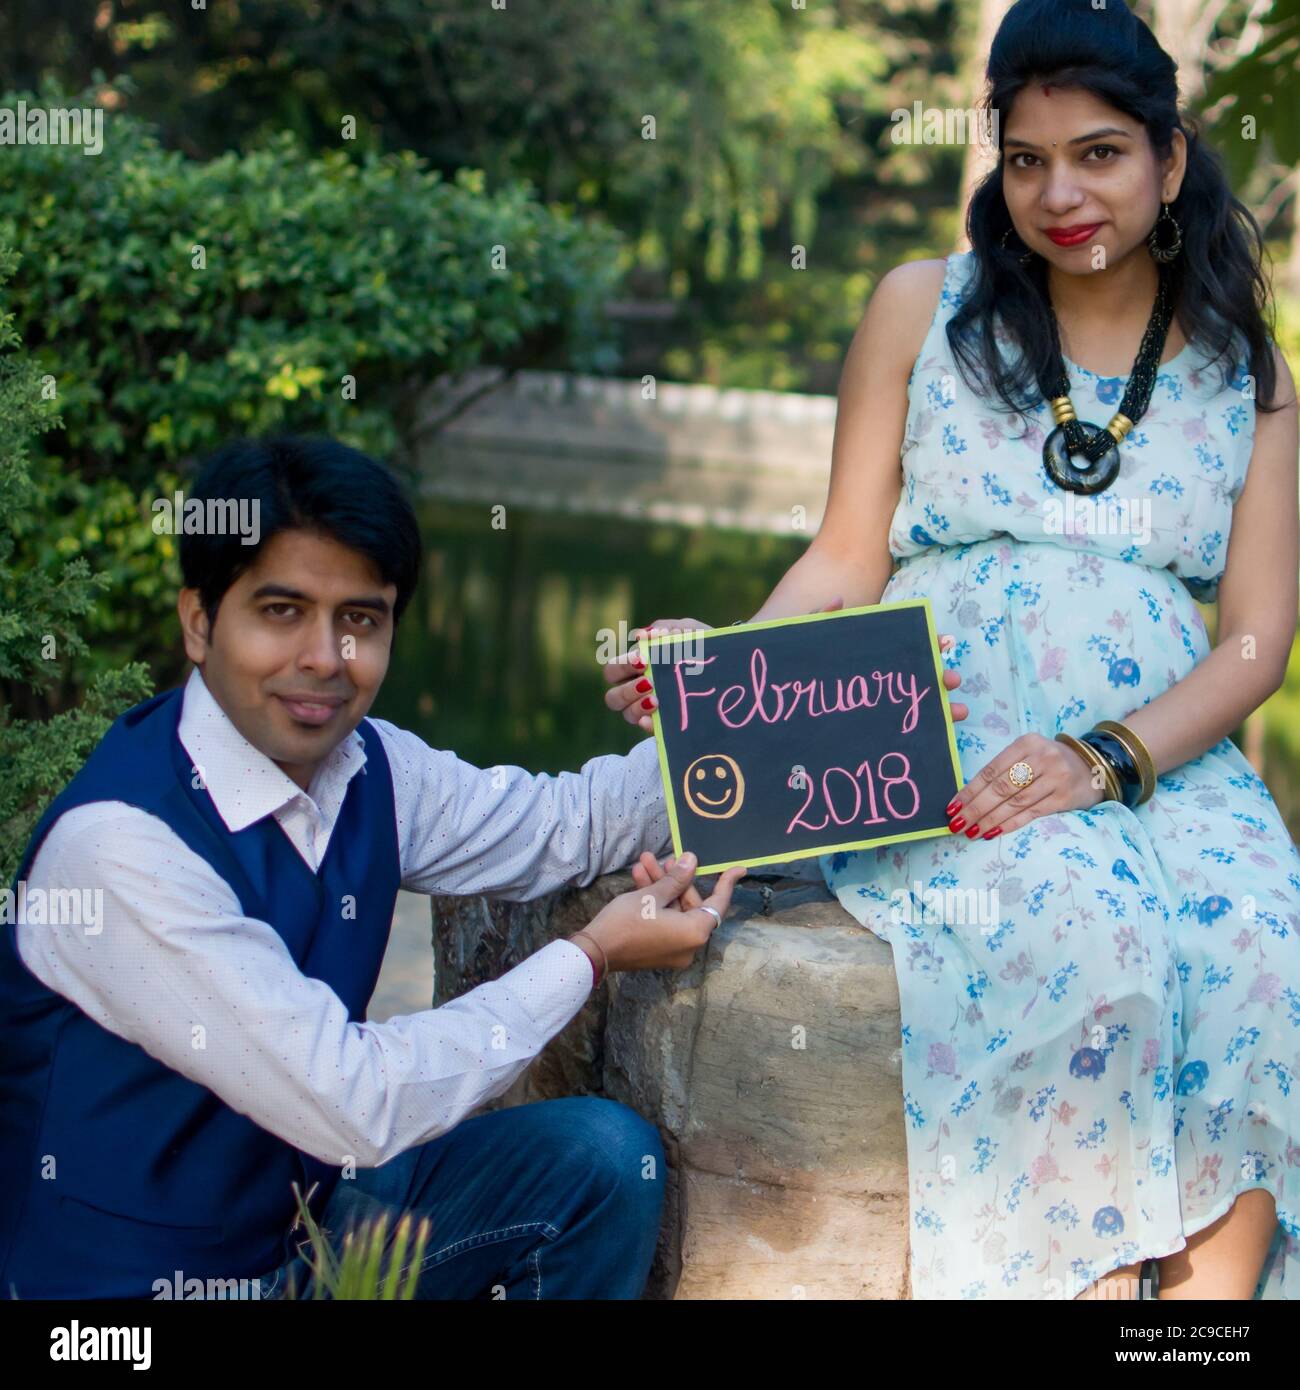 Discover Pregnancy Photoshoot Ideas: 20+ Creative Themes for a  One-of-a-Kind Maternity Session